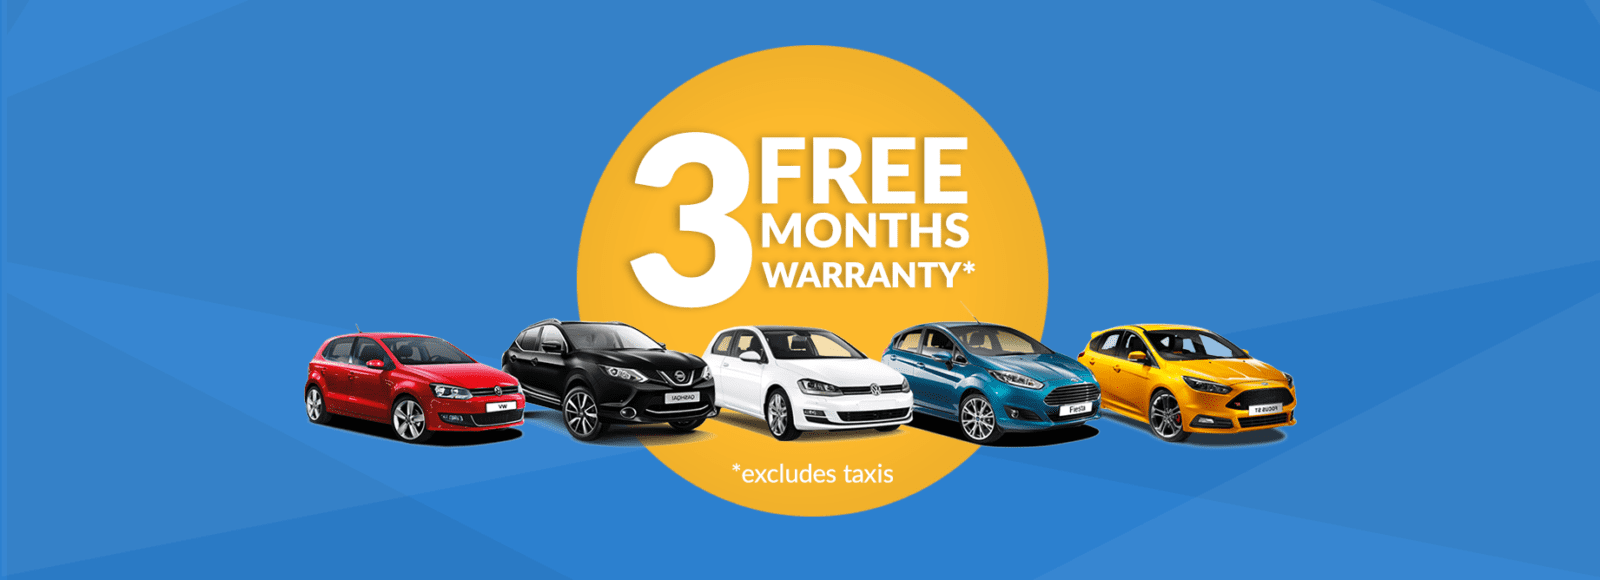 3 month warranty at refused car finance